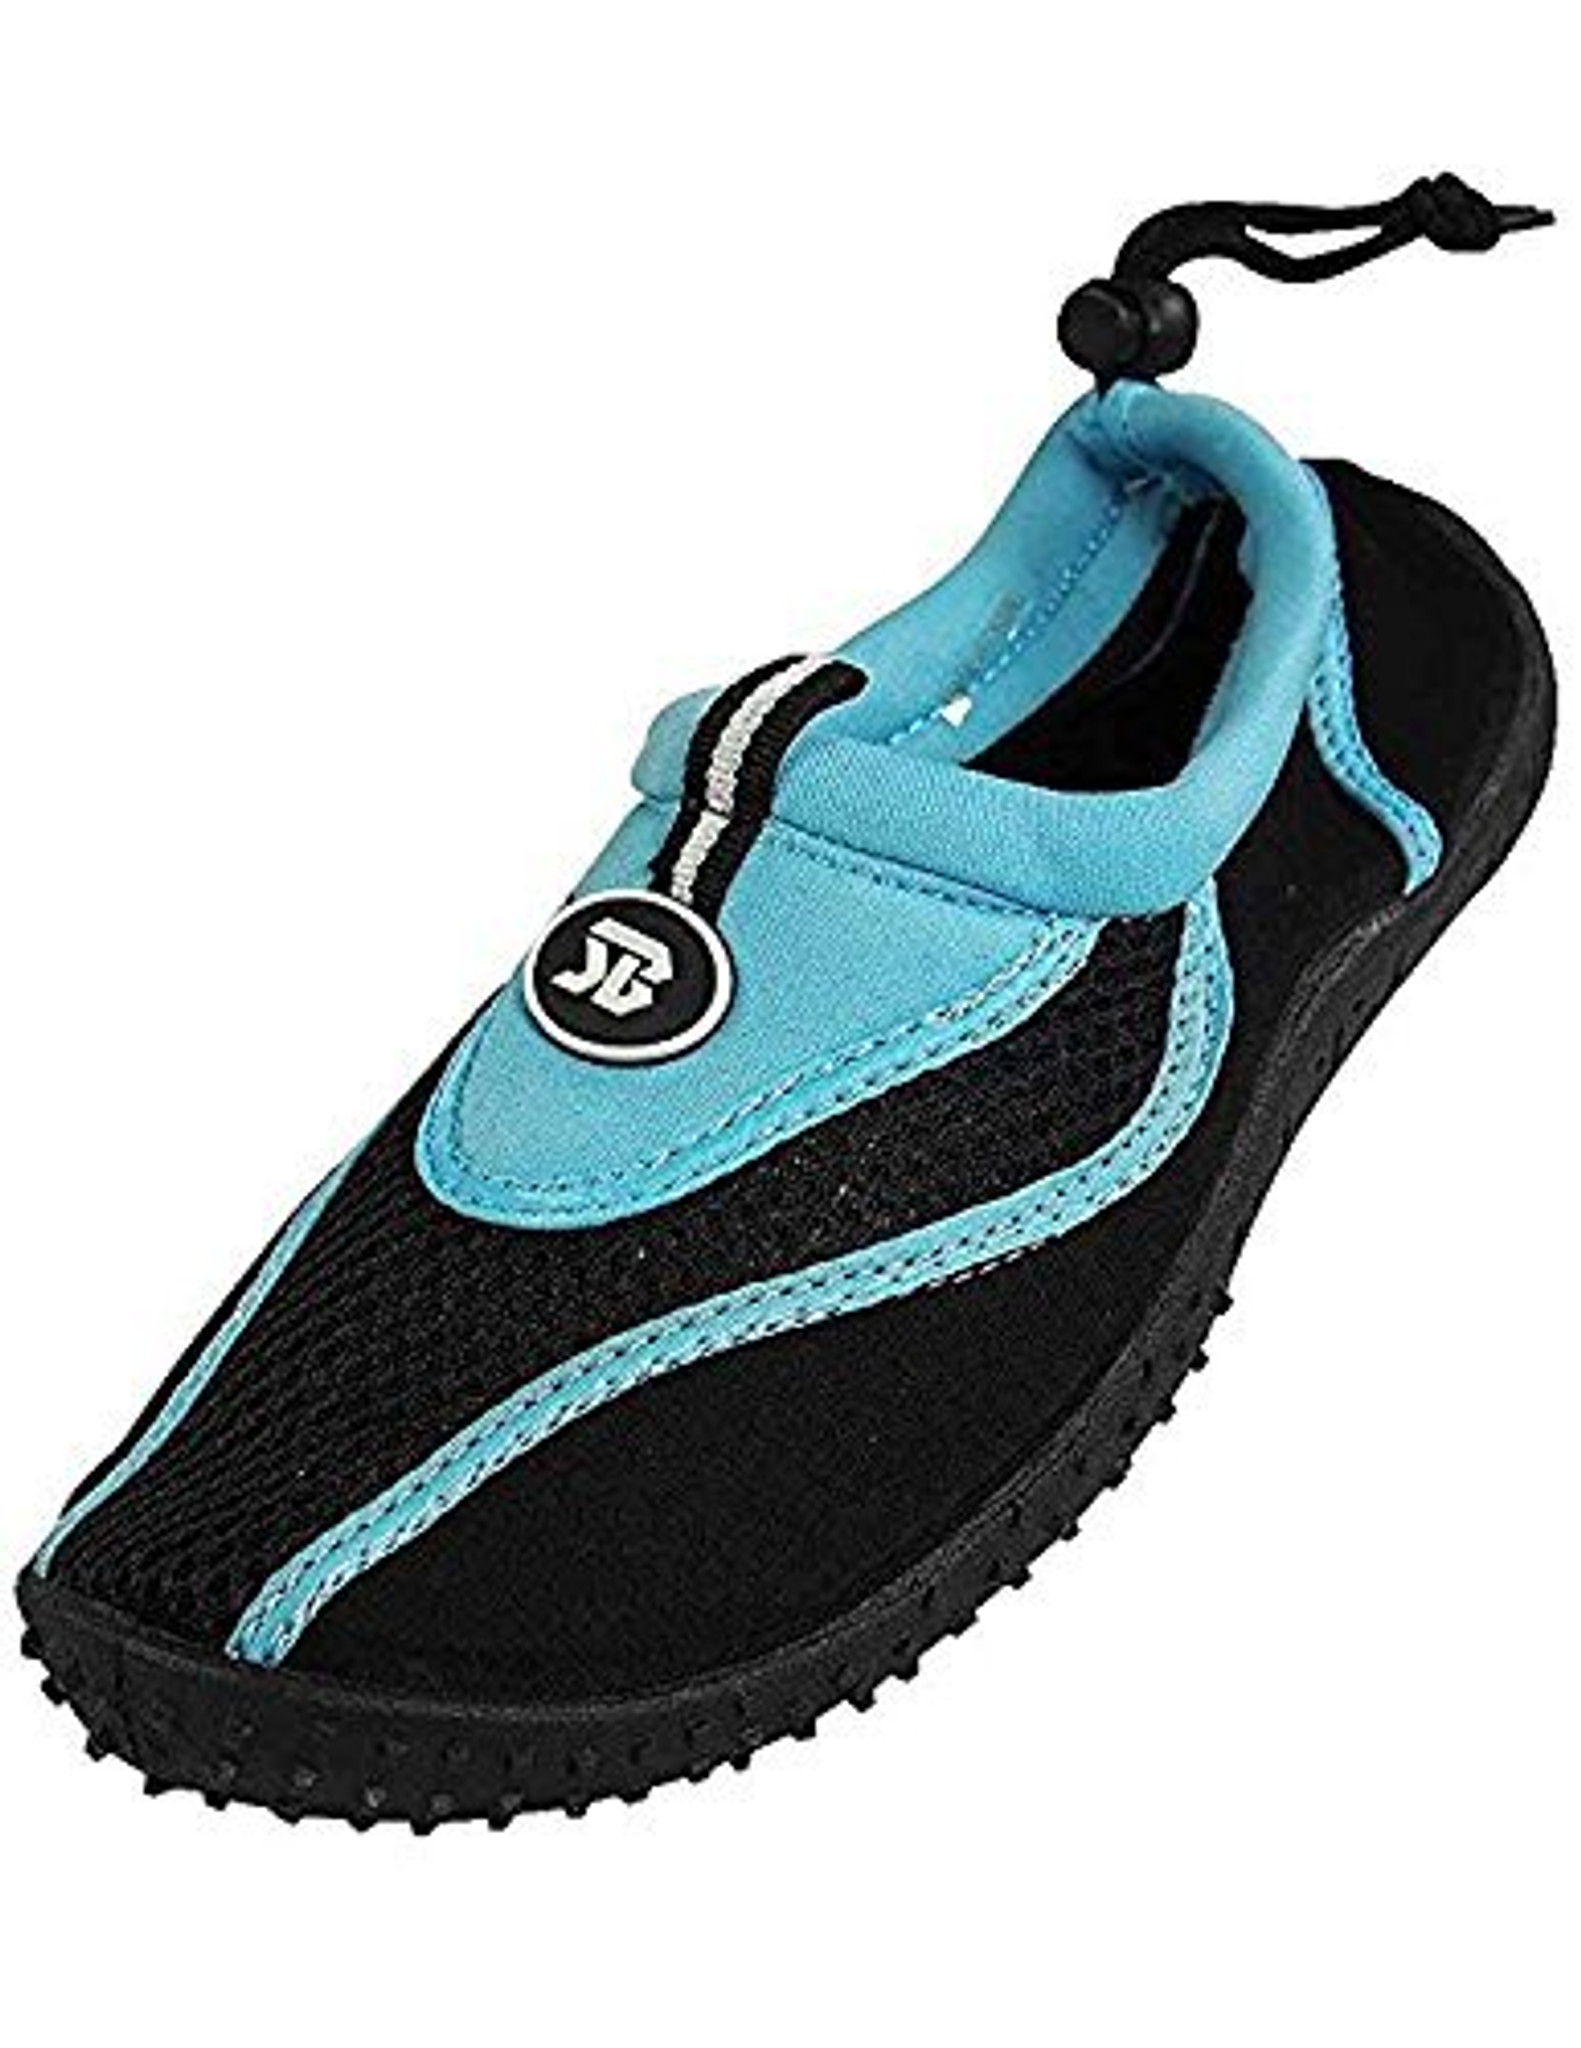 starbay water shoes